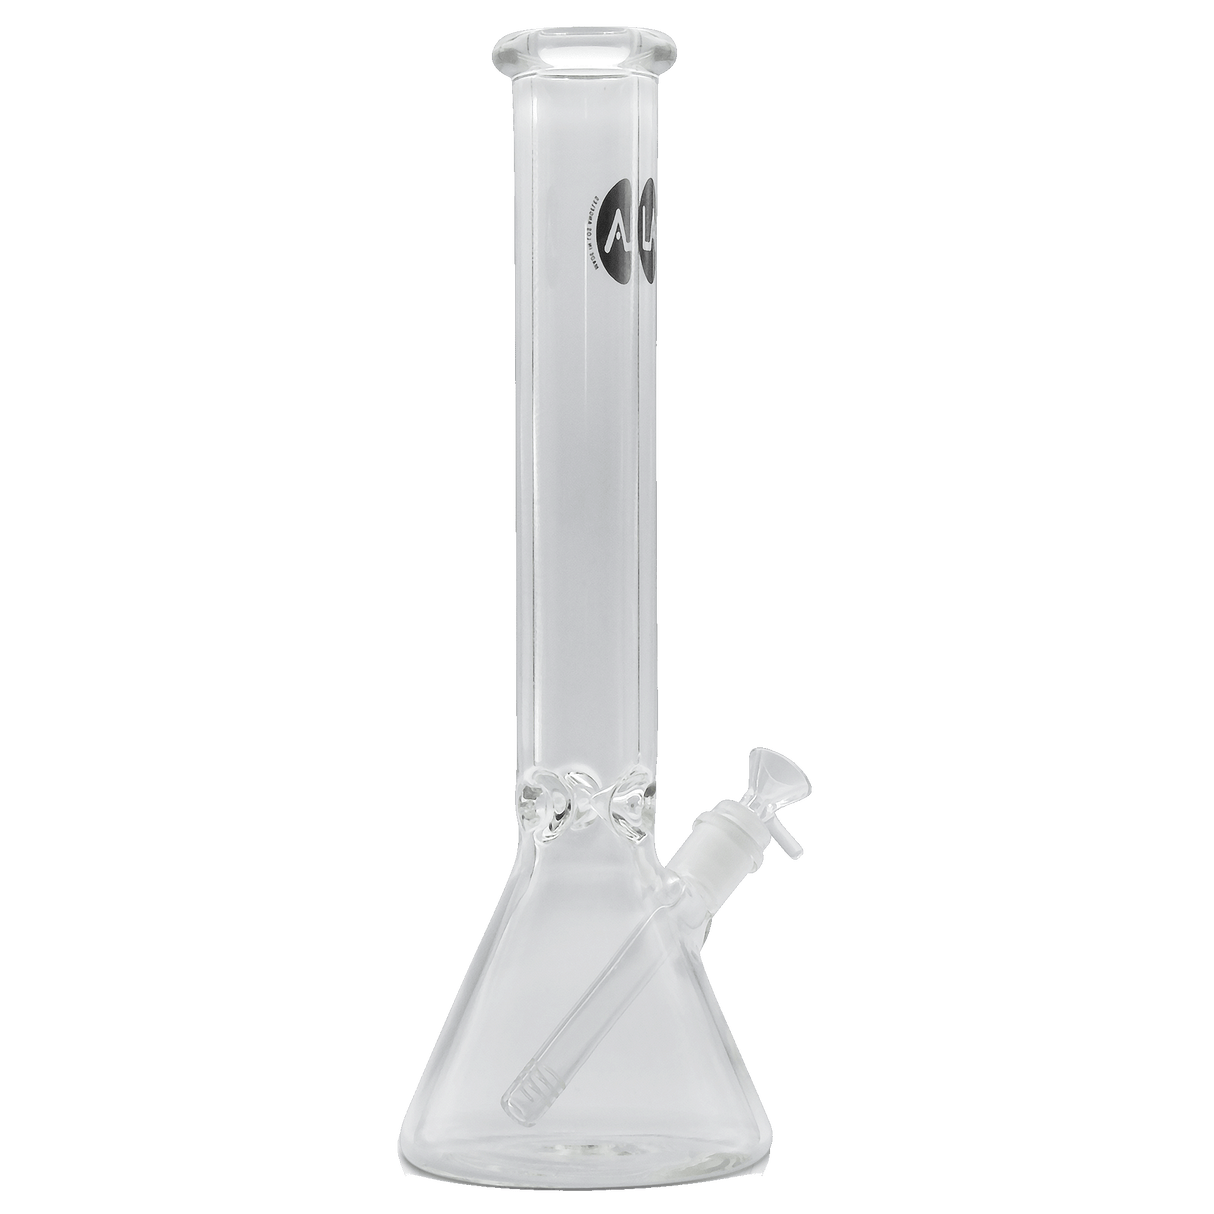 LA Pipes "Thicc Boy" 9mm Thick Beaker Bong, 16" Tall, Borosilicate Glass, Front View